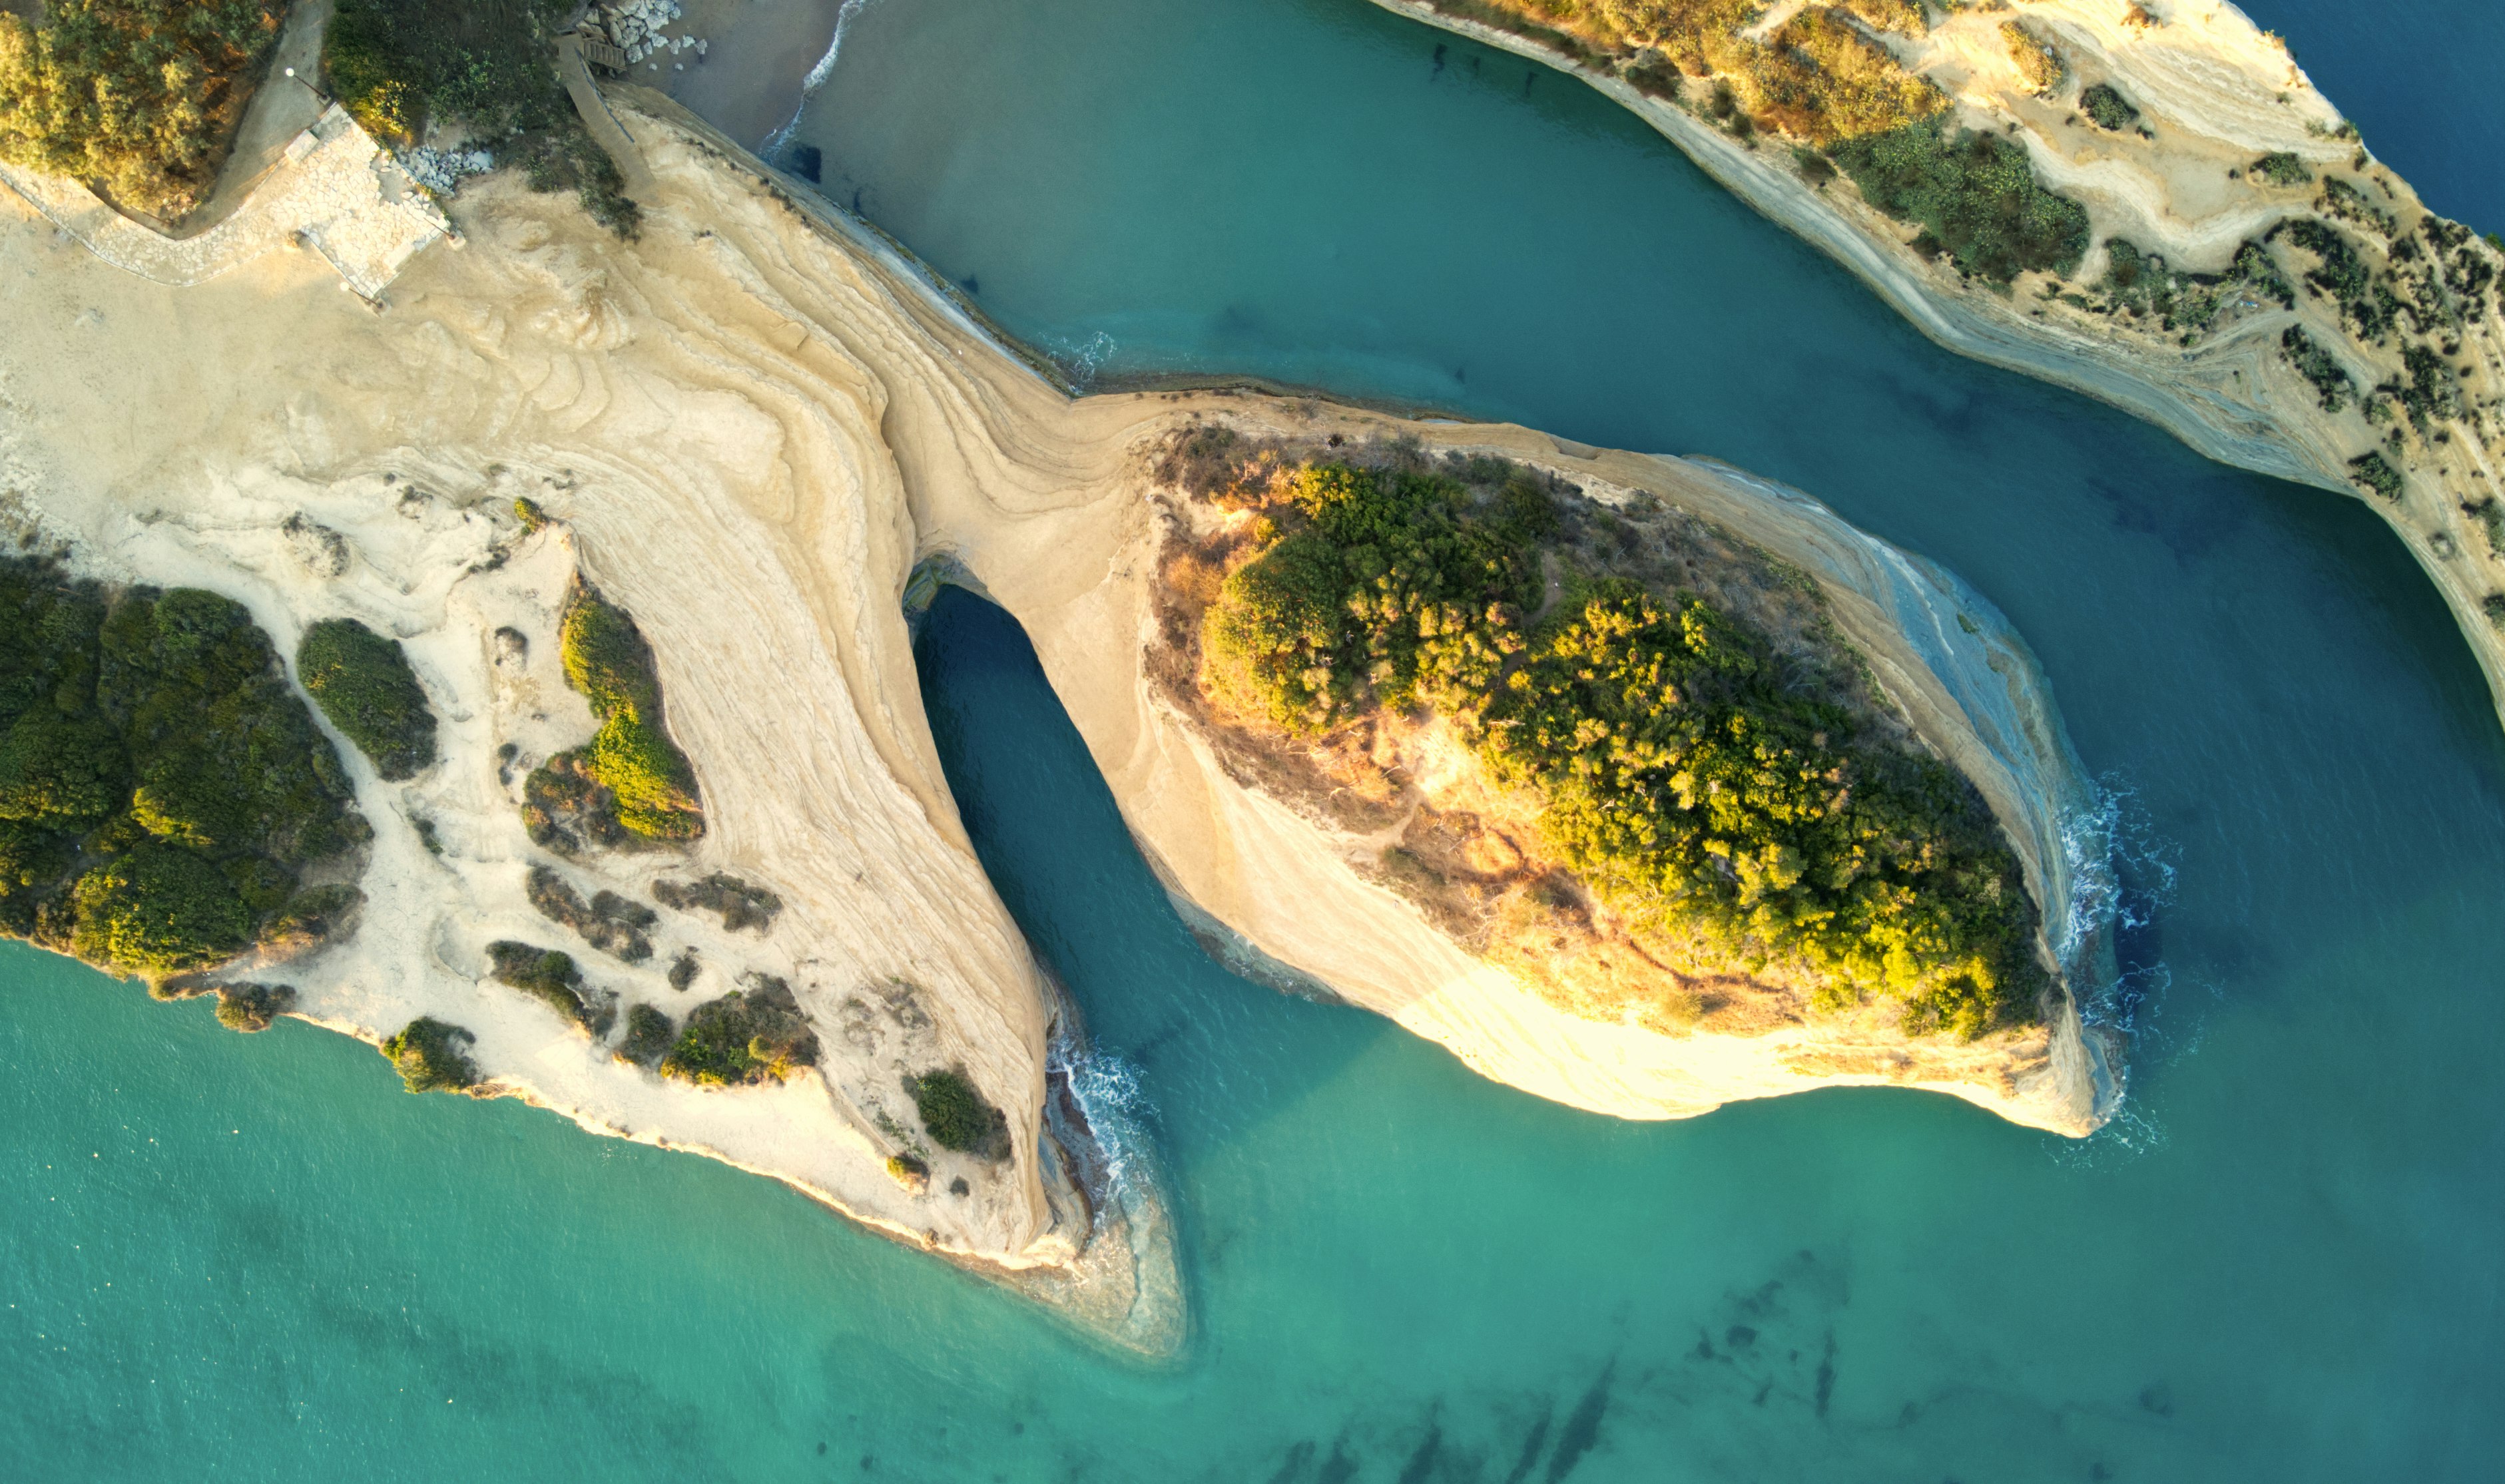 Photo by drone of Canal d'Amour in Sidari, Corfu, Greece.